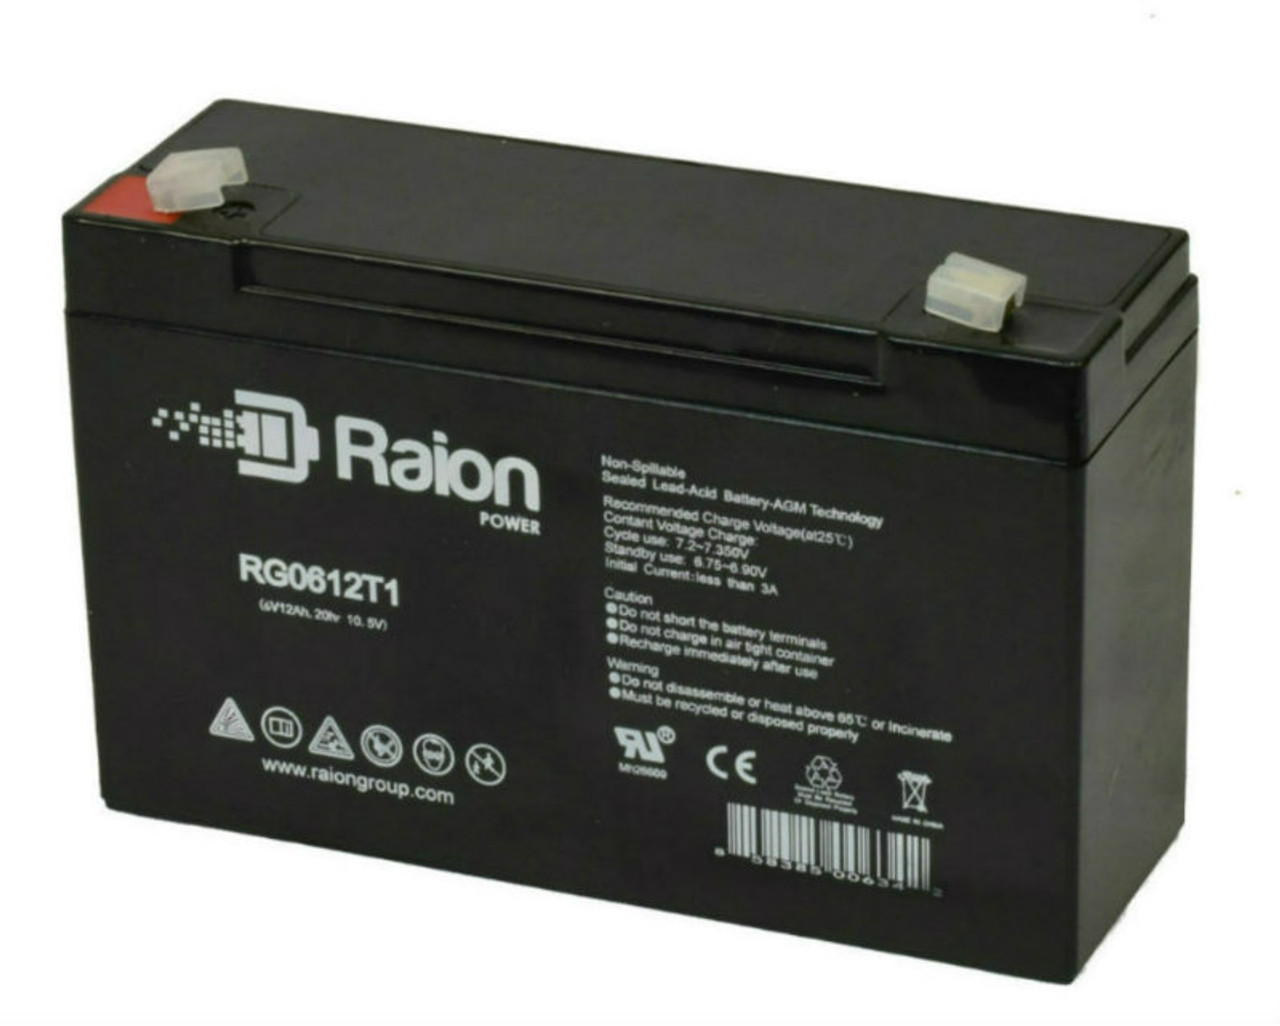 Raion Power RG06120T1 Replacement Emergency Light Battery for Tork 430